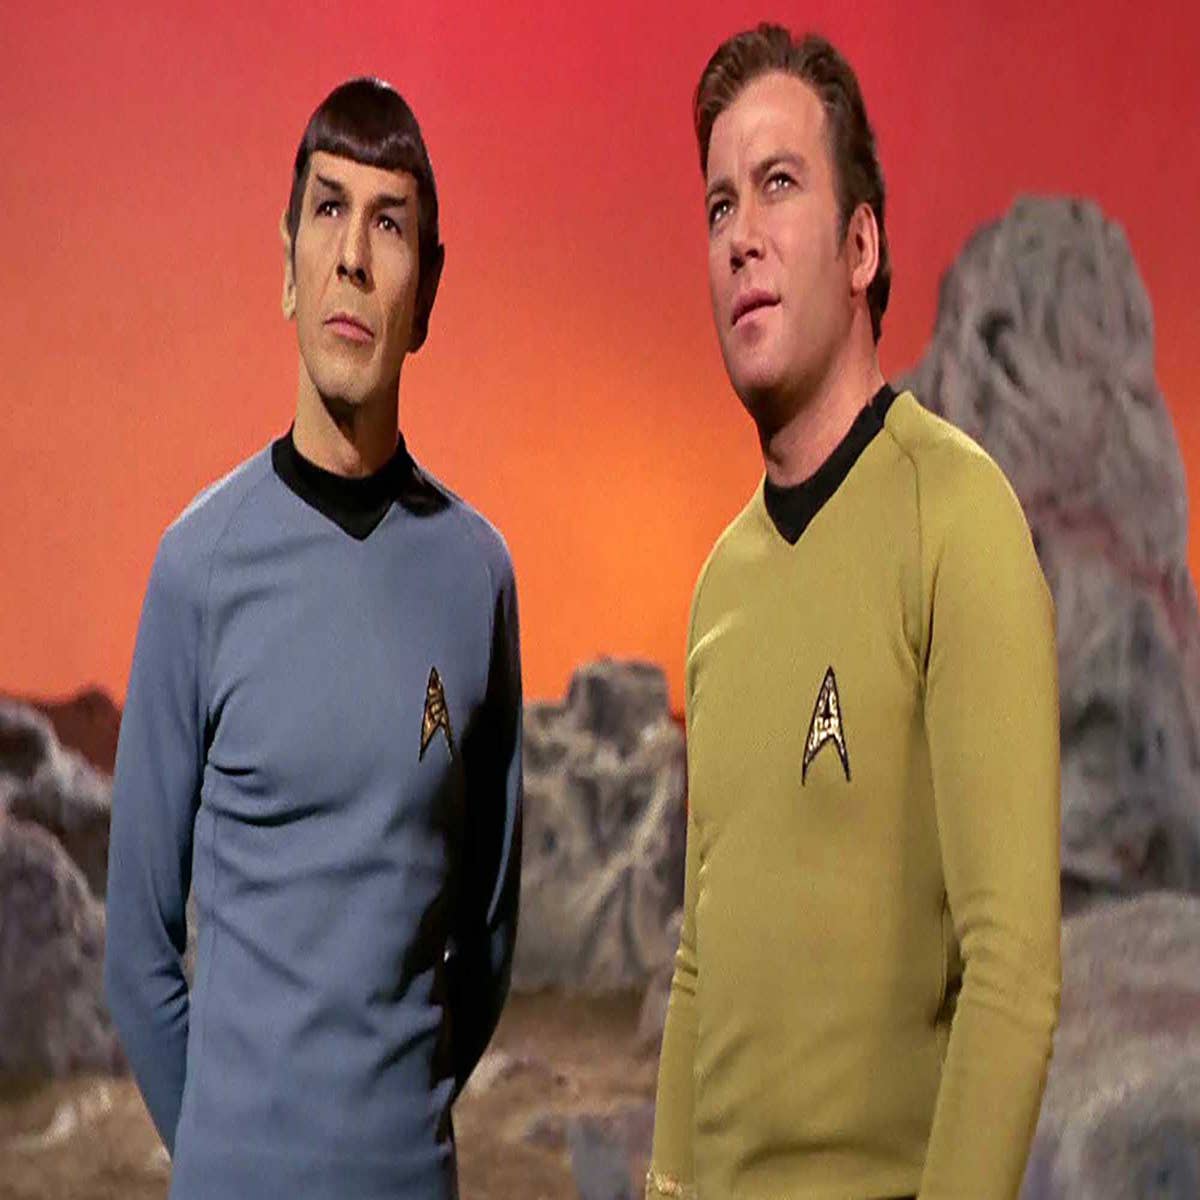 How to watch Star Trek in order, release and chronological